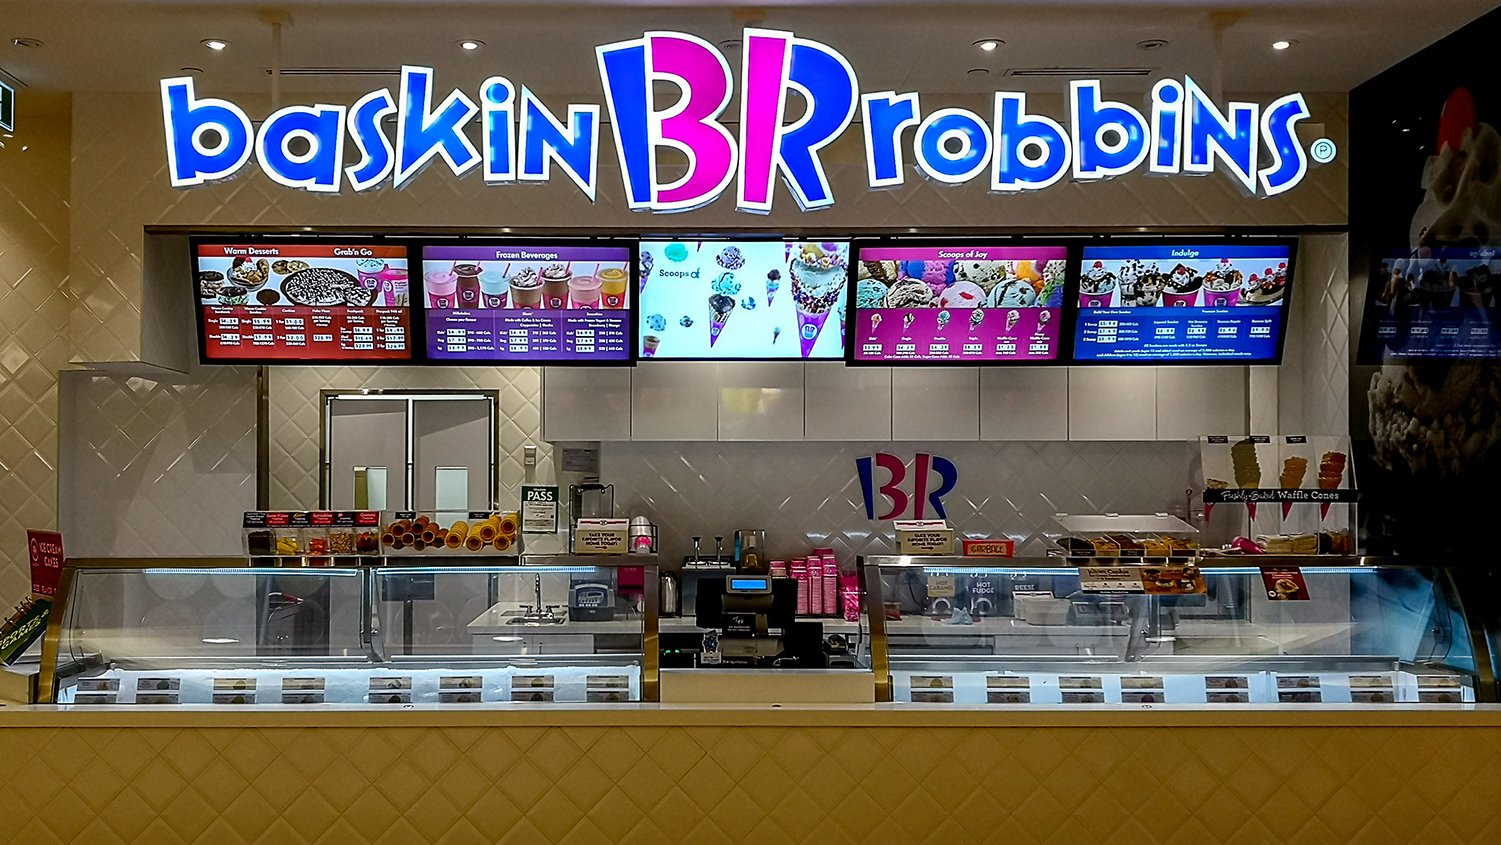 Baskin-Robbins Becomes First Major Chain To Launch Vegan Ice Cream Made From Oat Milk